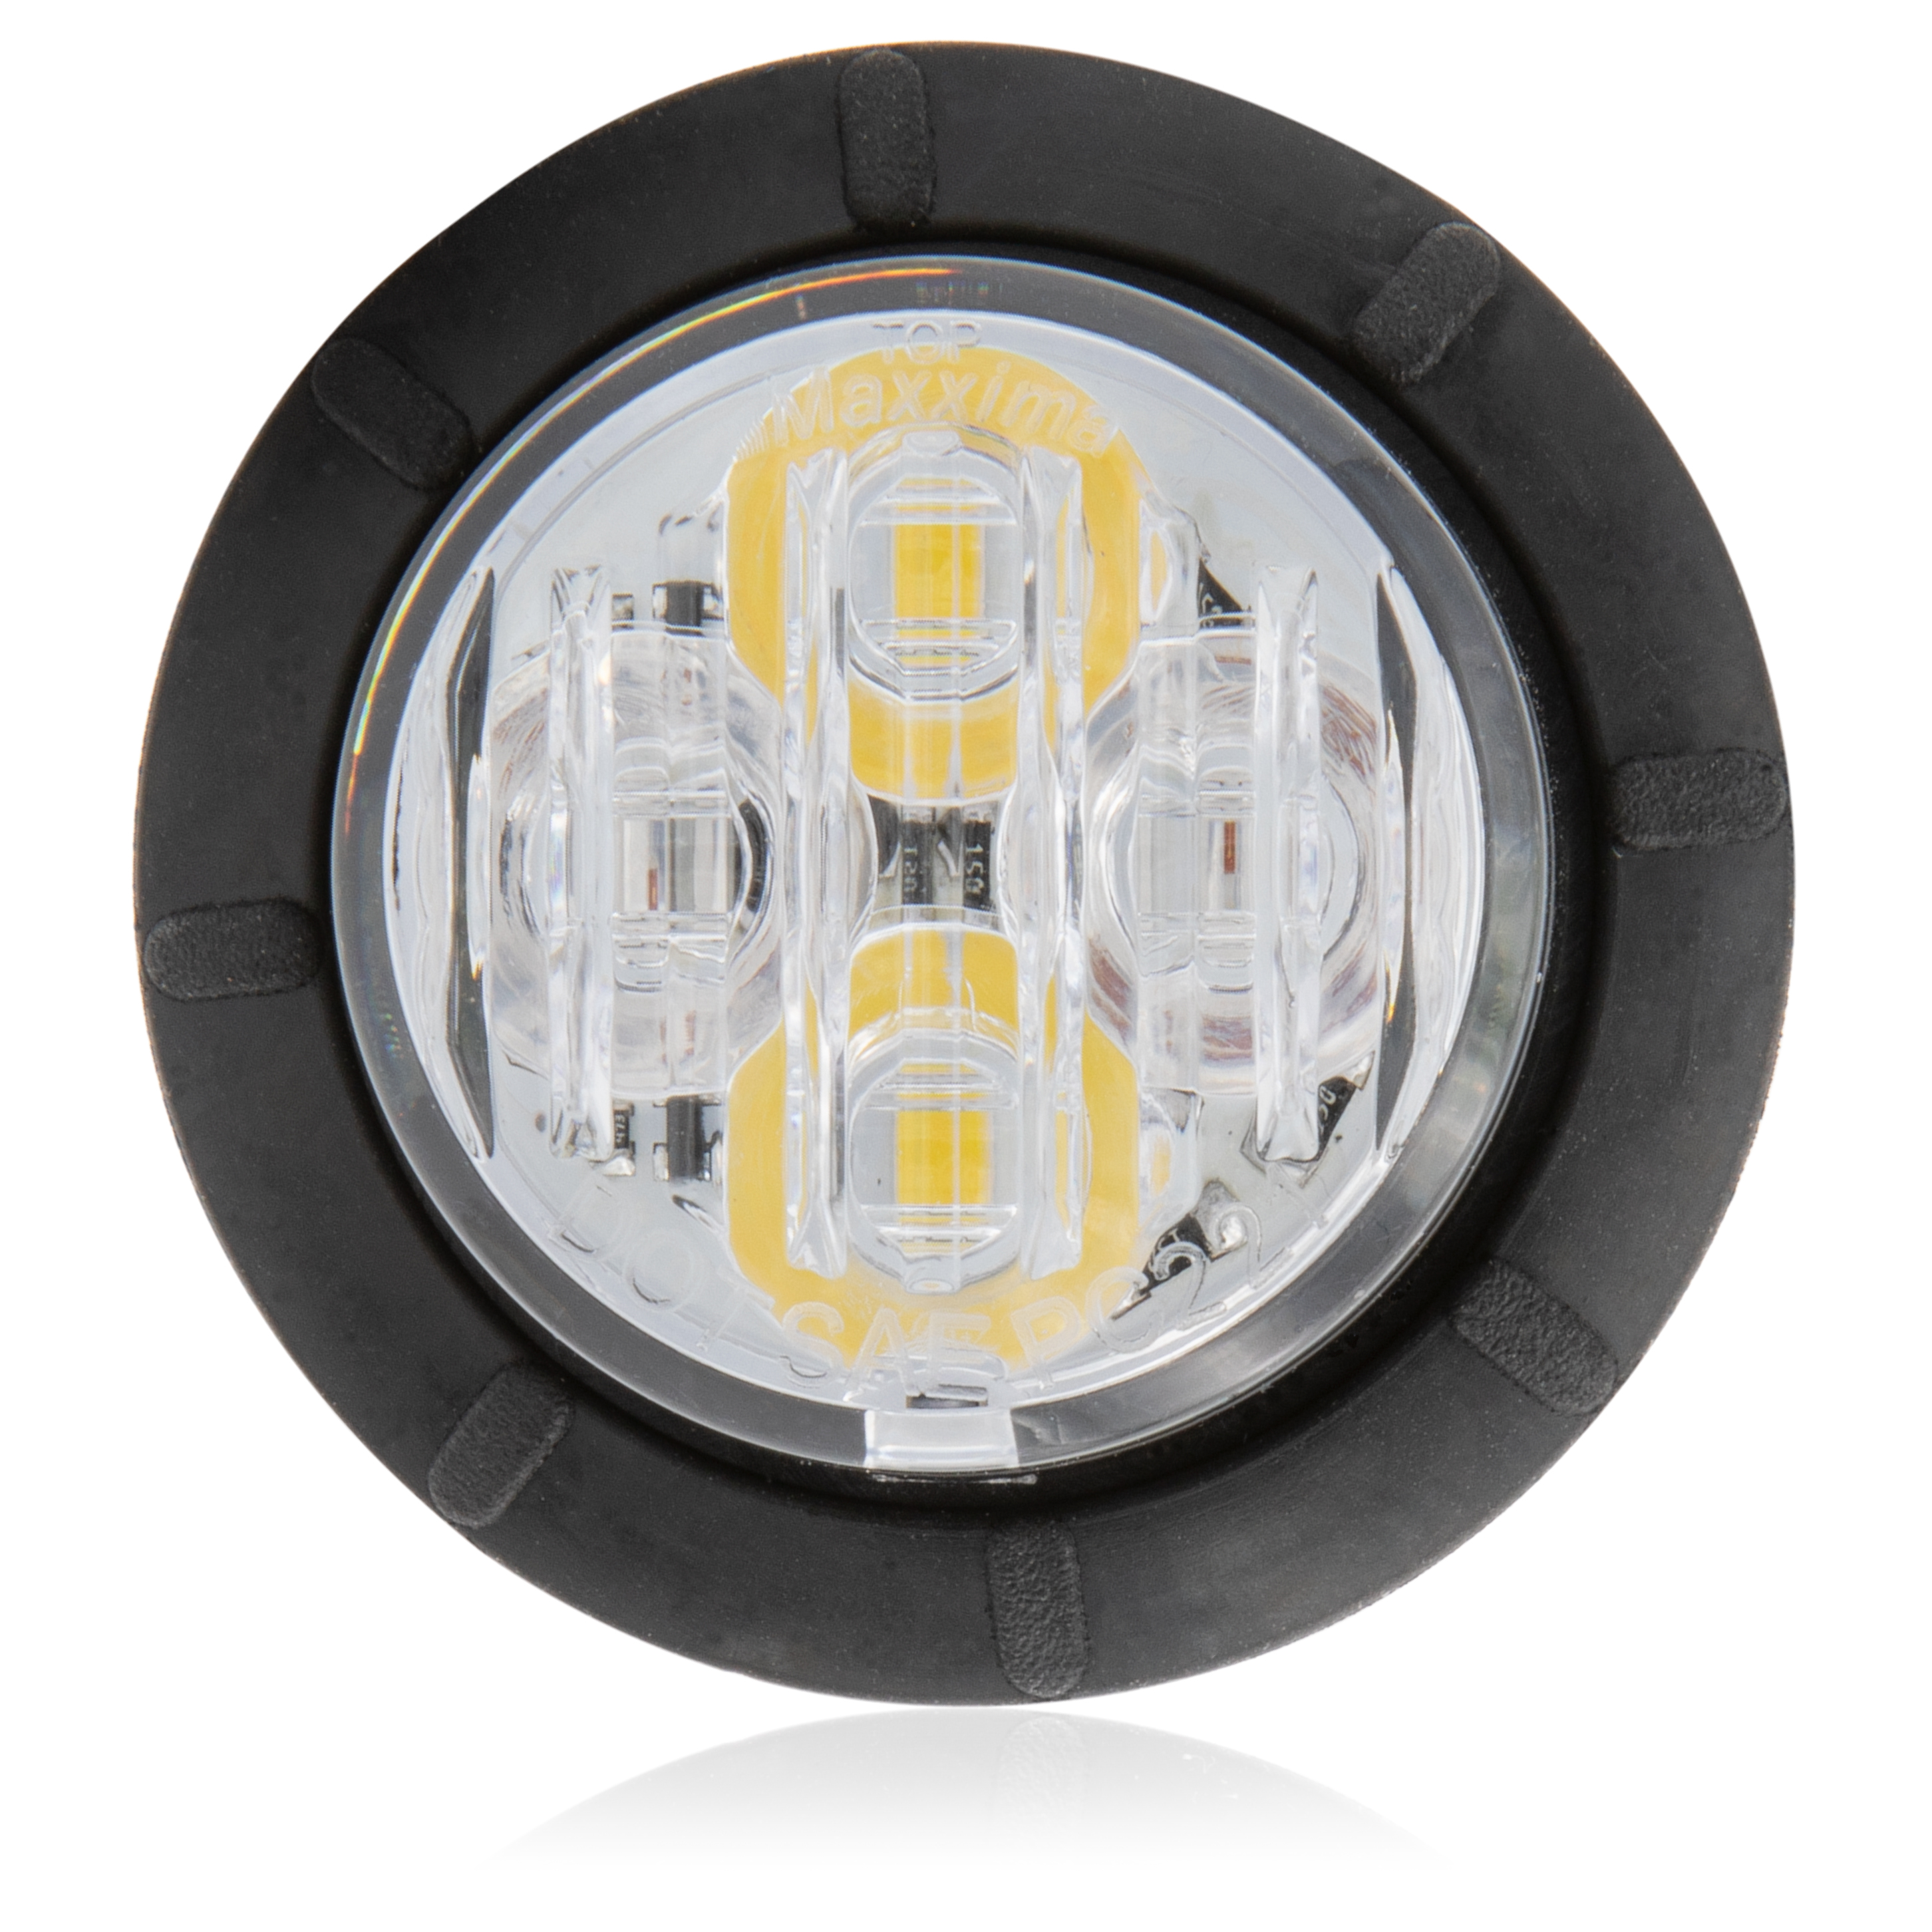 1-1/4" Clearance Marker AND Flashing Warning Light